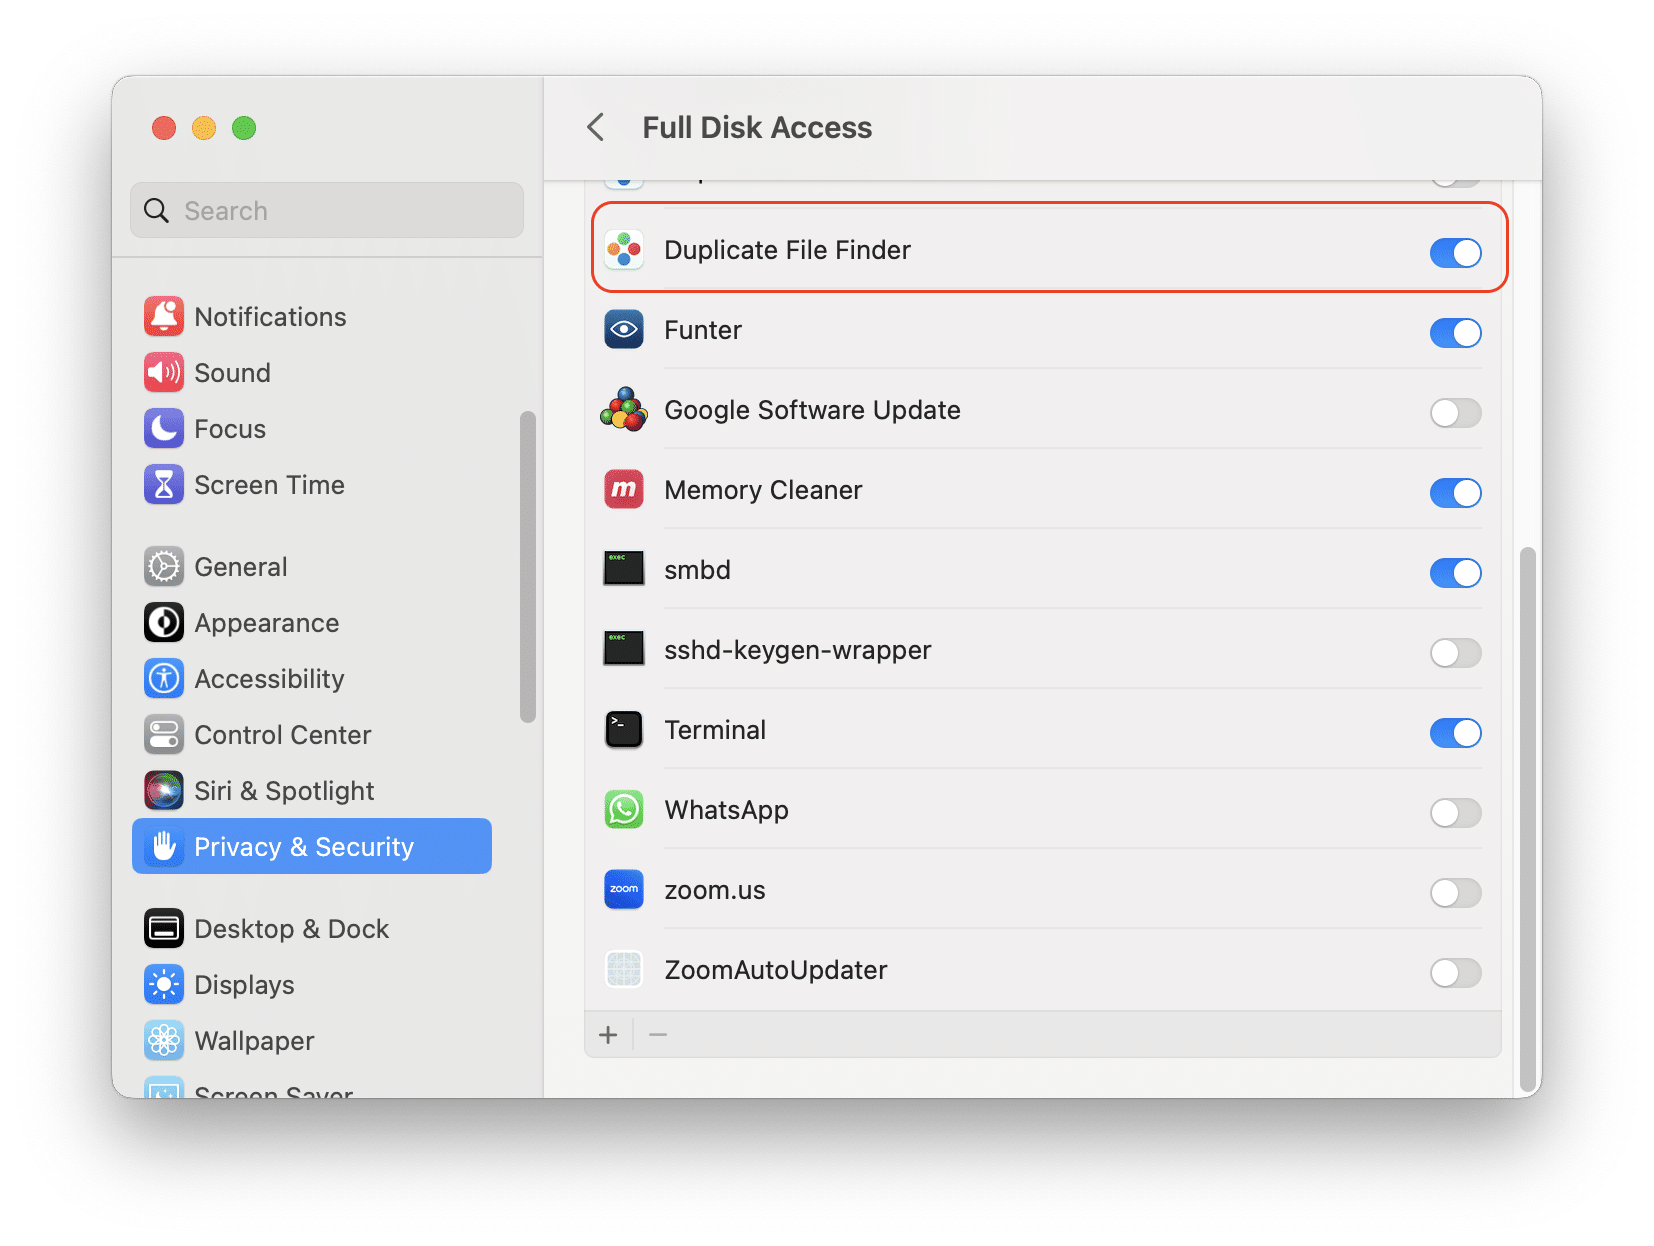 Full disk Access for Duplicate File Finder